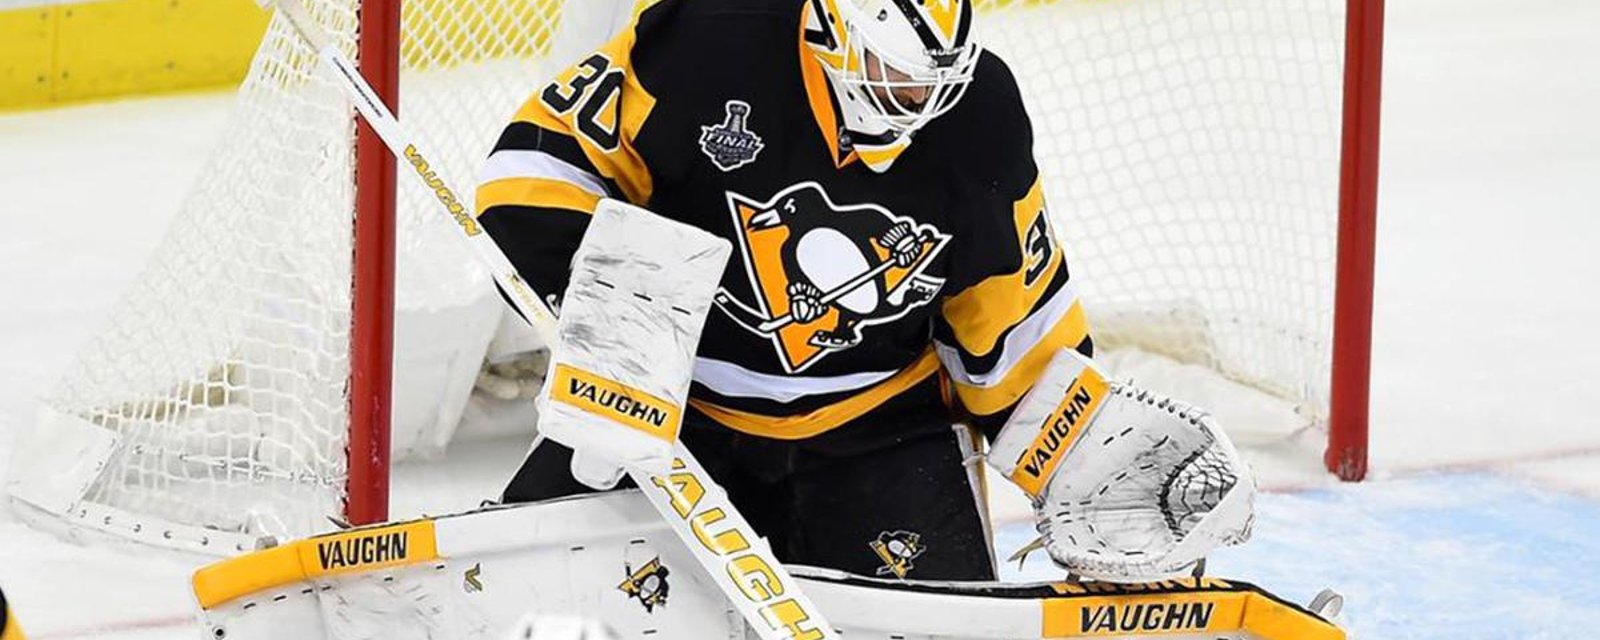 Breaking: More awful injury news for Murray and the Pens